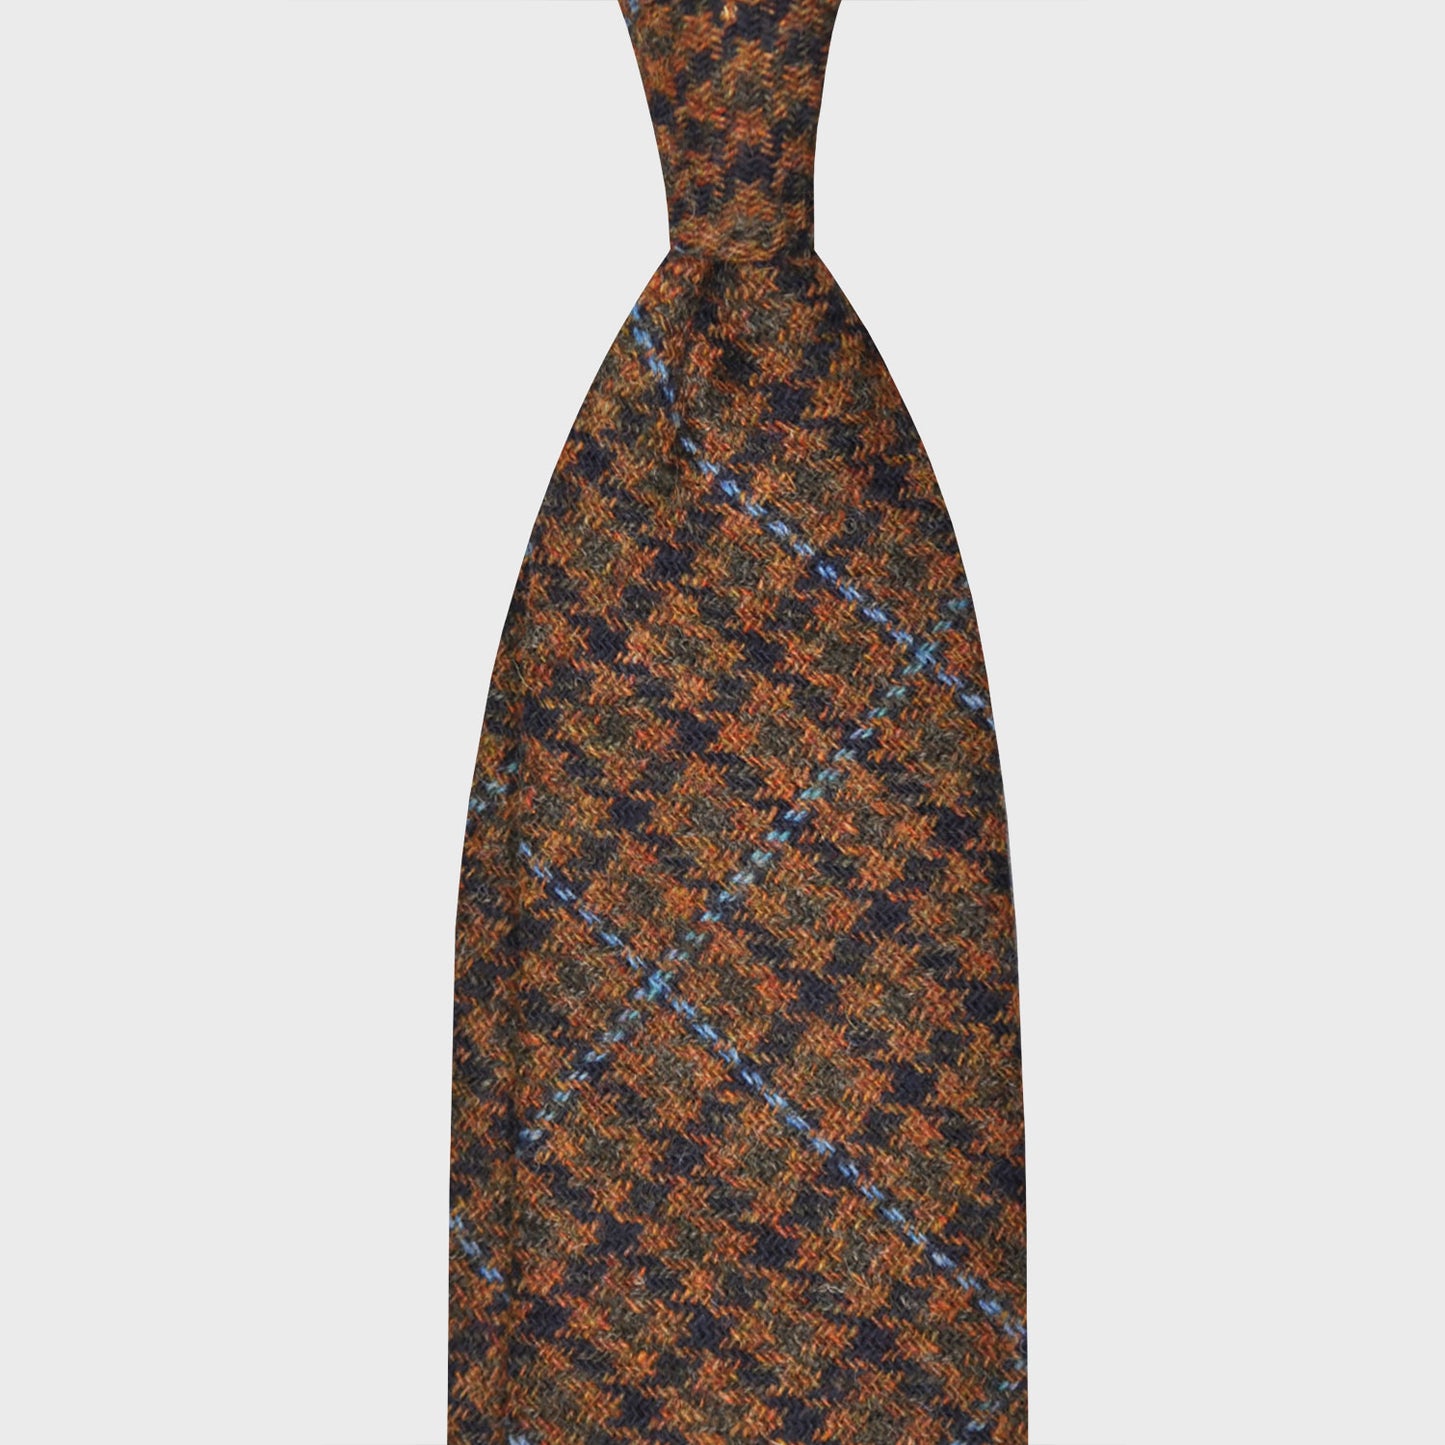 Brown Tweed Tie Unlined Pied de Poule Pattern. Elegant tweed tie, wool texture to the touch bristly feeling, unlined tie handmade in Italy by F.Marino Napoli exclusive for Wools Boutique Uomo, pied de poule pattern brown and green, light blue windowpane.